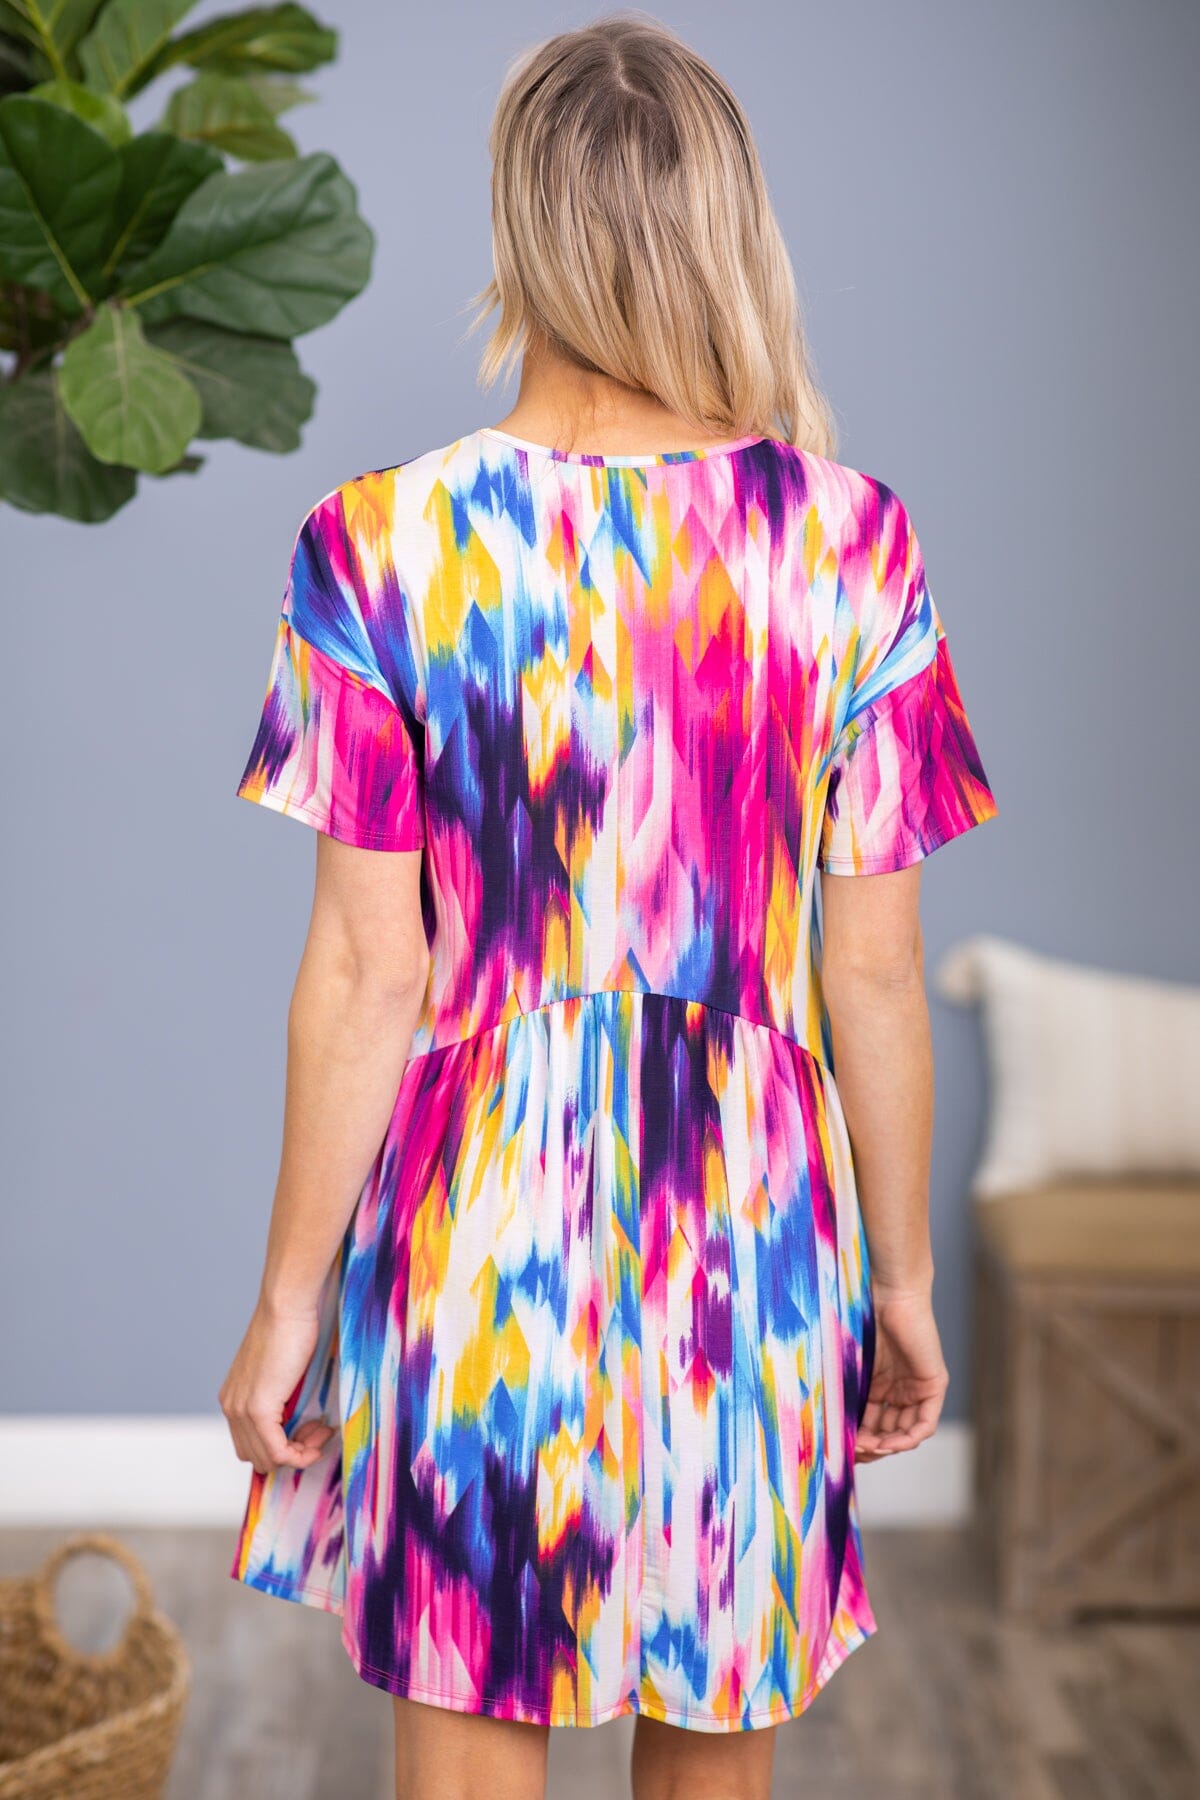 Hot Pink and Cobalt Multicolor Tie Dye Dress - Filly Flair